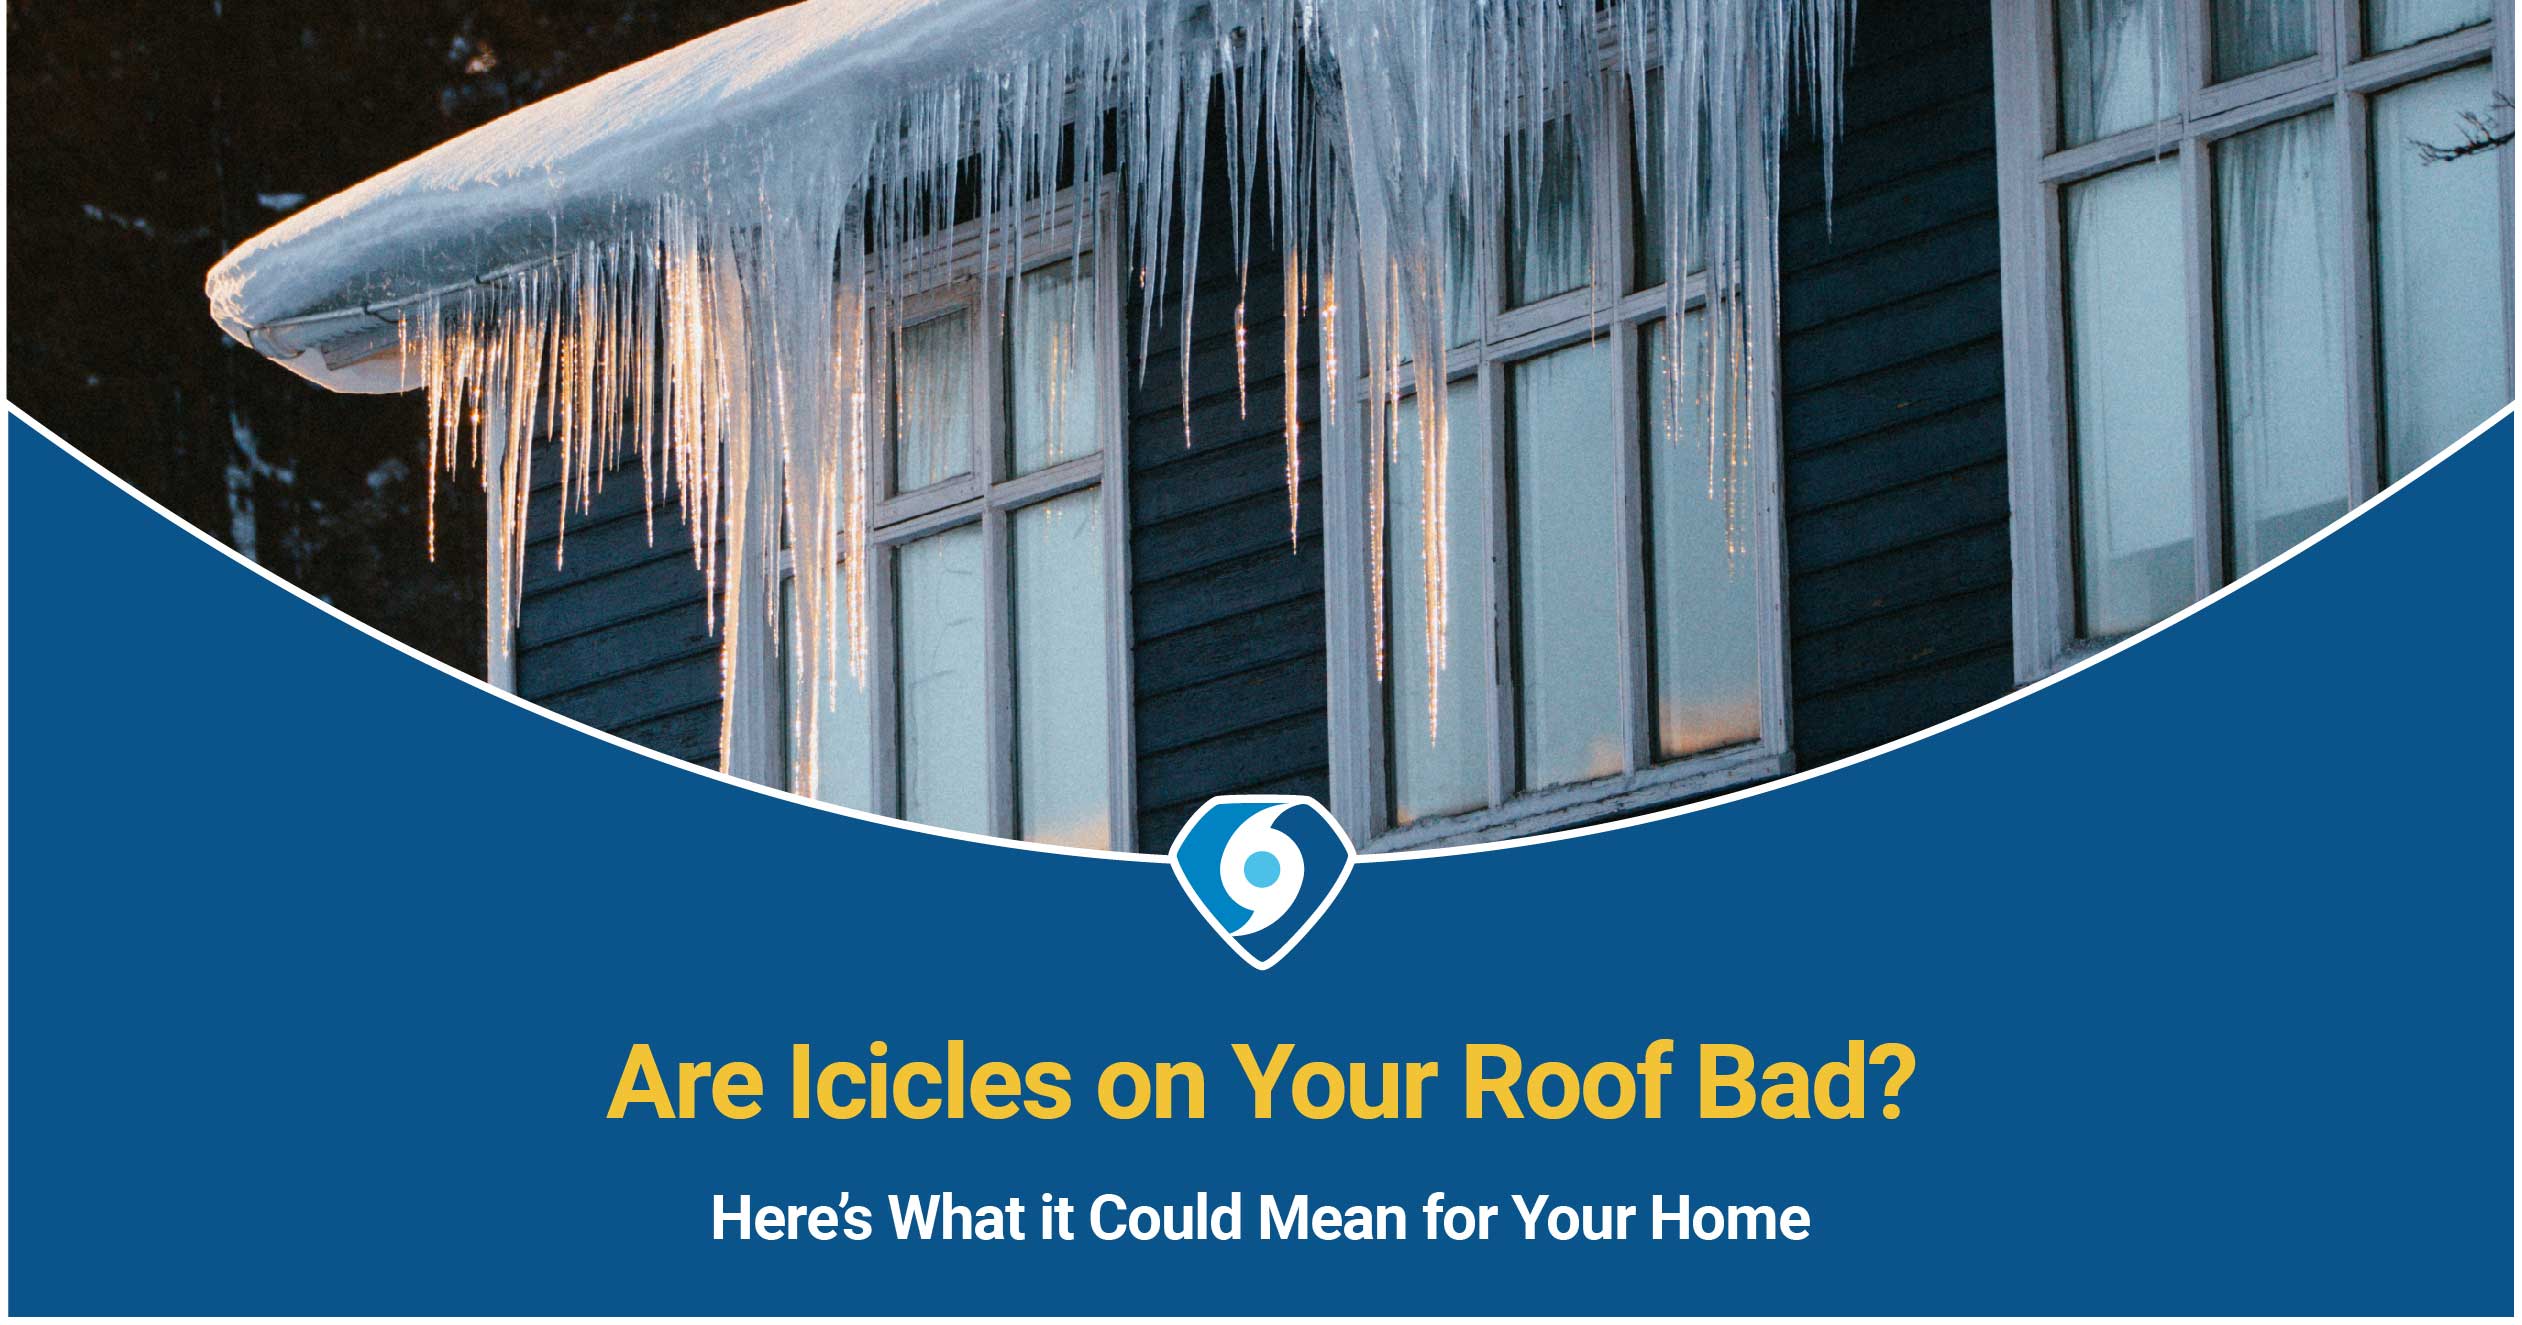 Tips for Preventing And Handling Ice Dams on Roofs